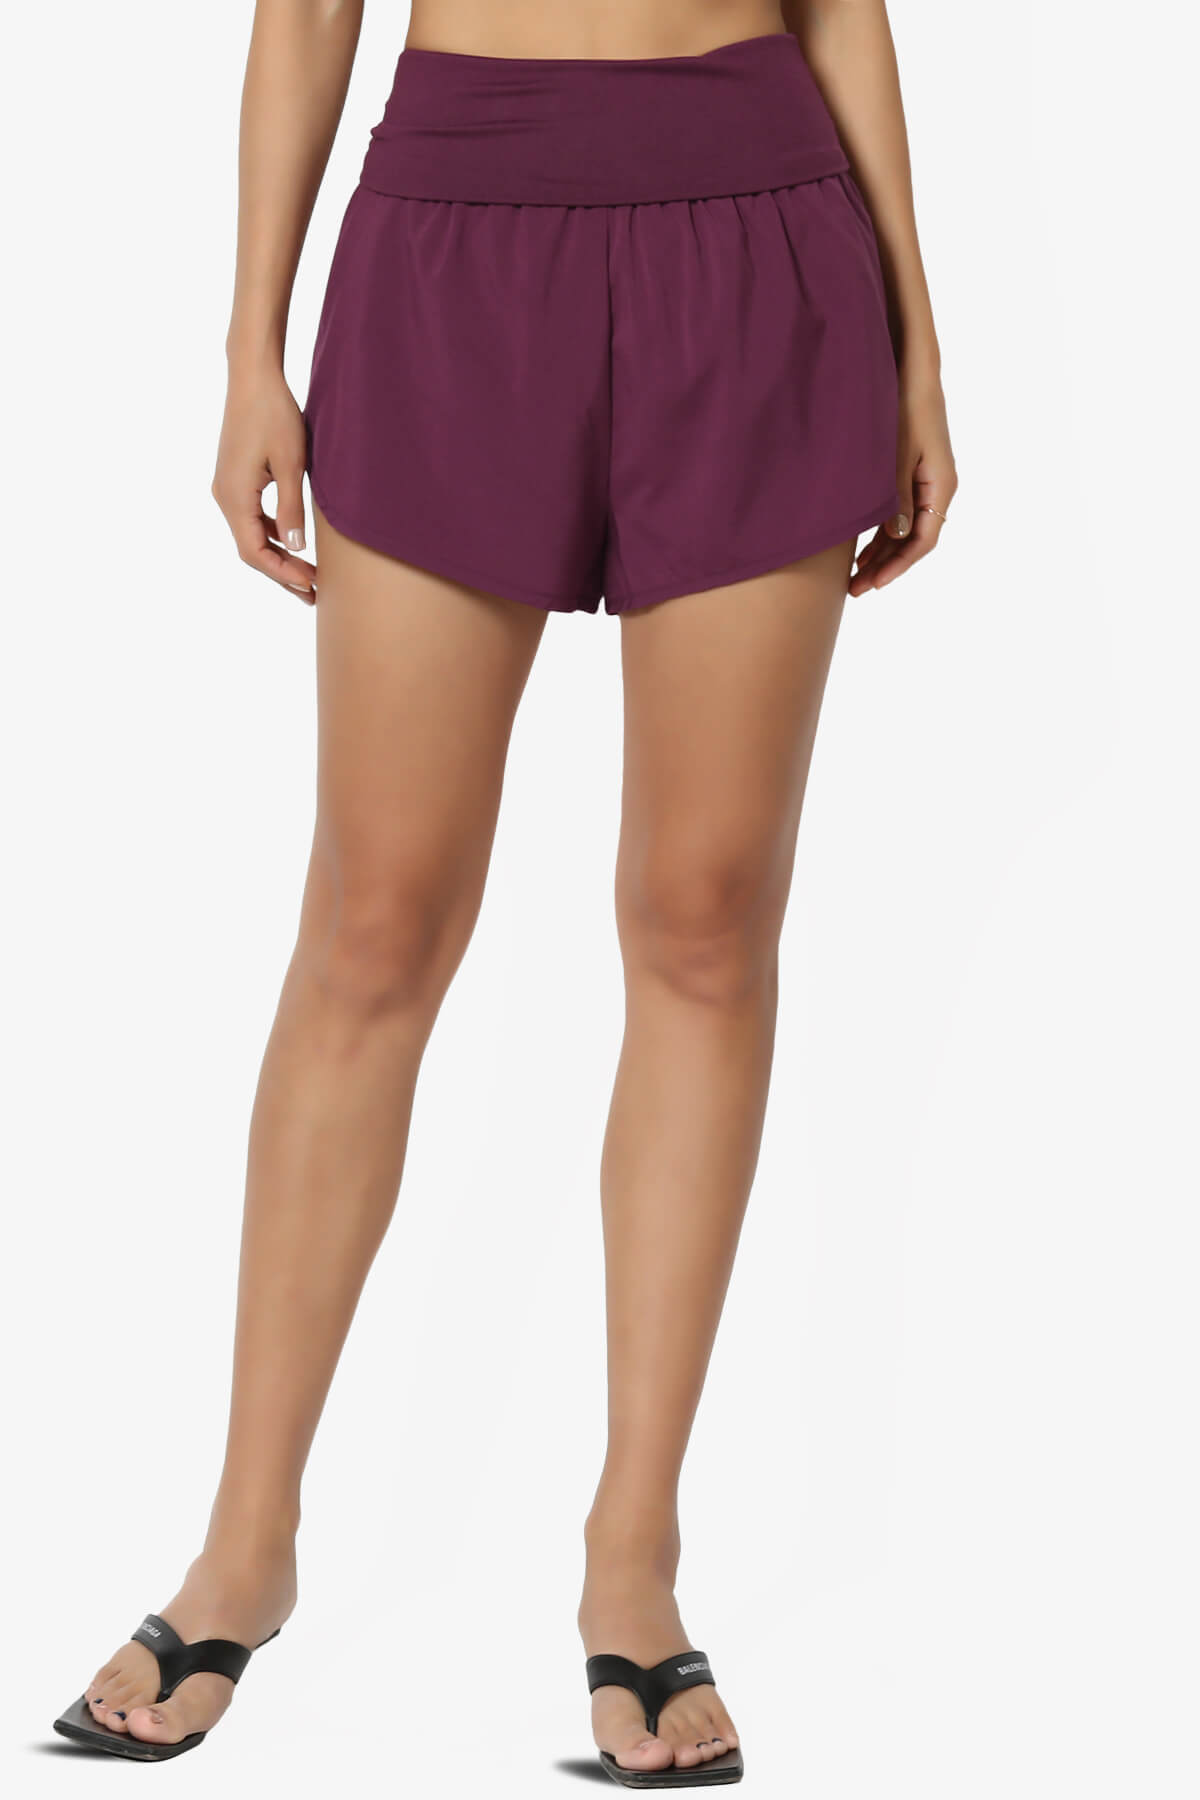 Load image into Gallery viewer, Game Time Foldover High Waist Running Shorts DUSTY PLUM_1
